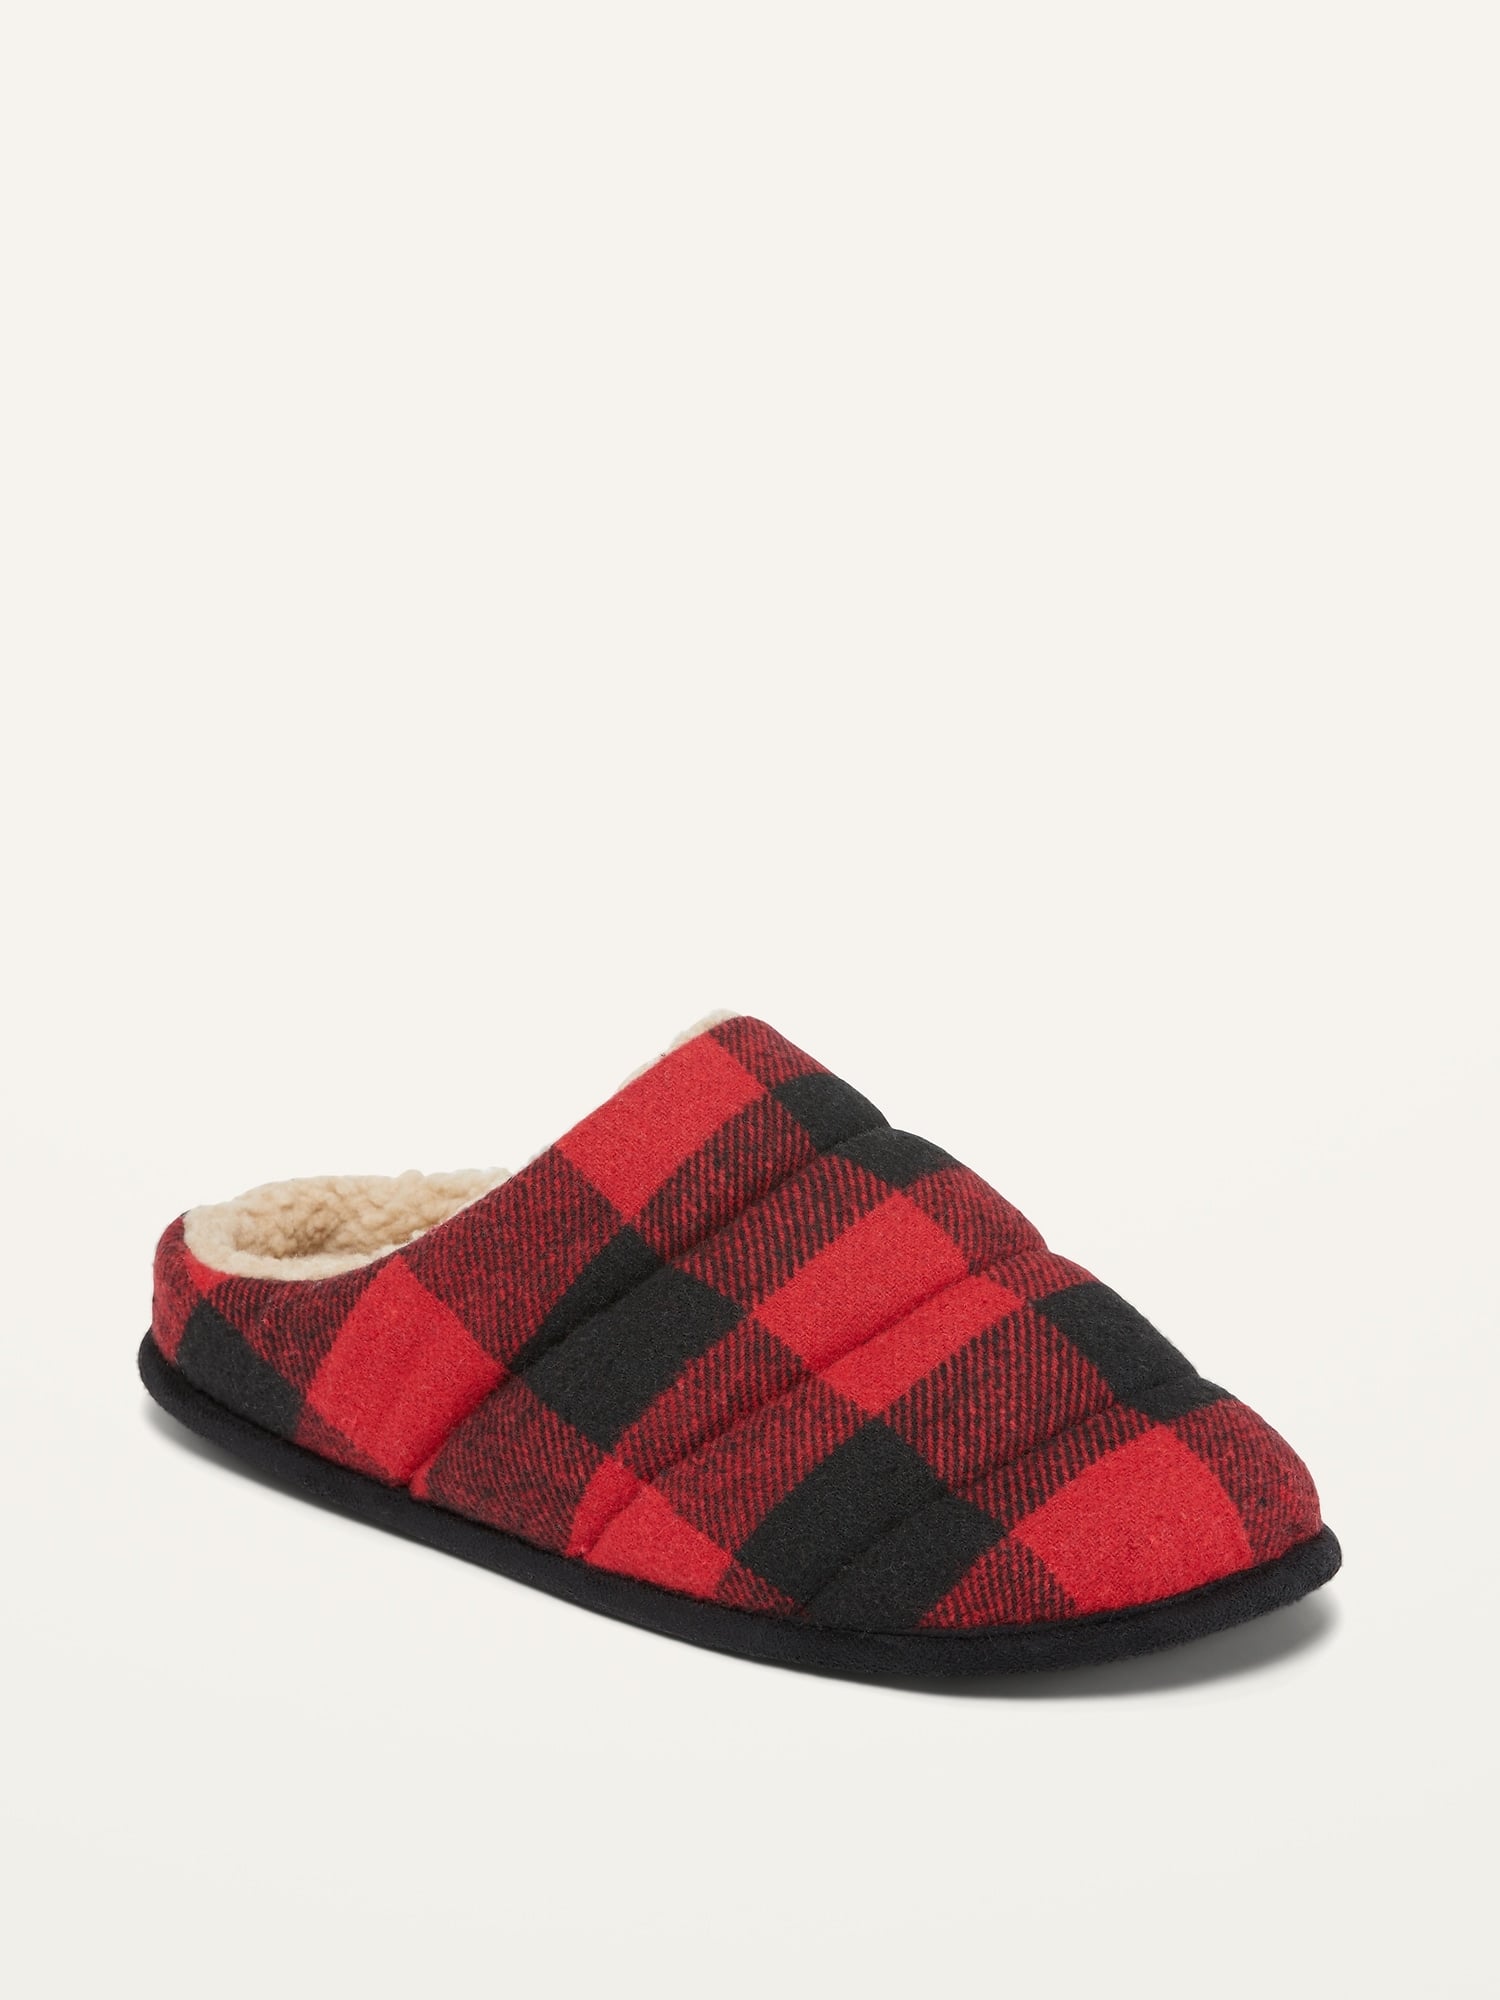 Cosy Quilted Buffalo Plaid Flannel Slippers for Men